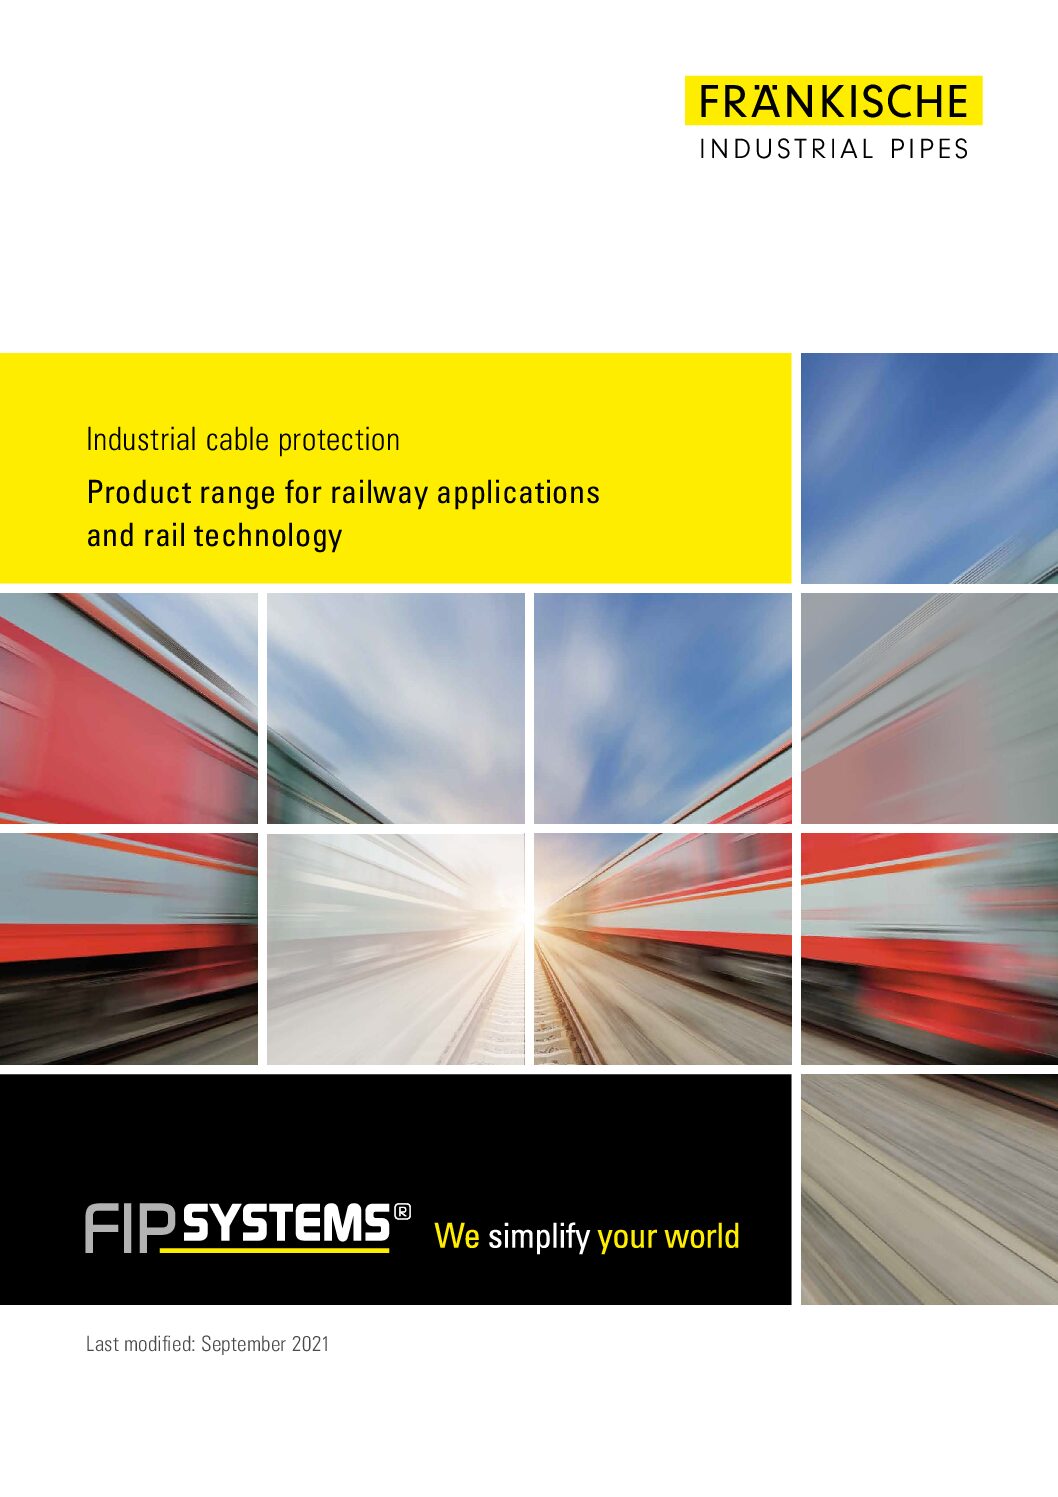 Industrial Cable Protection for Railway Applications and Rail Technology